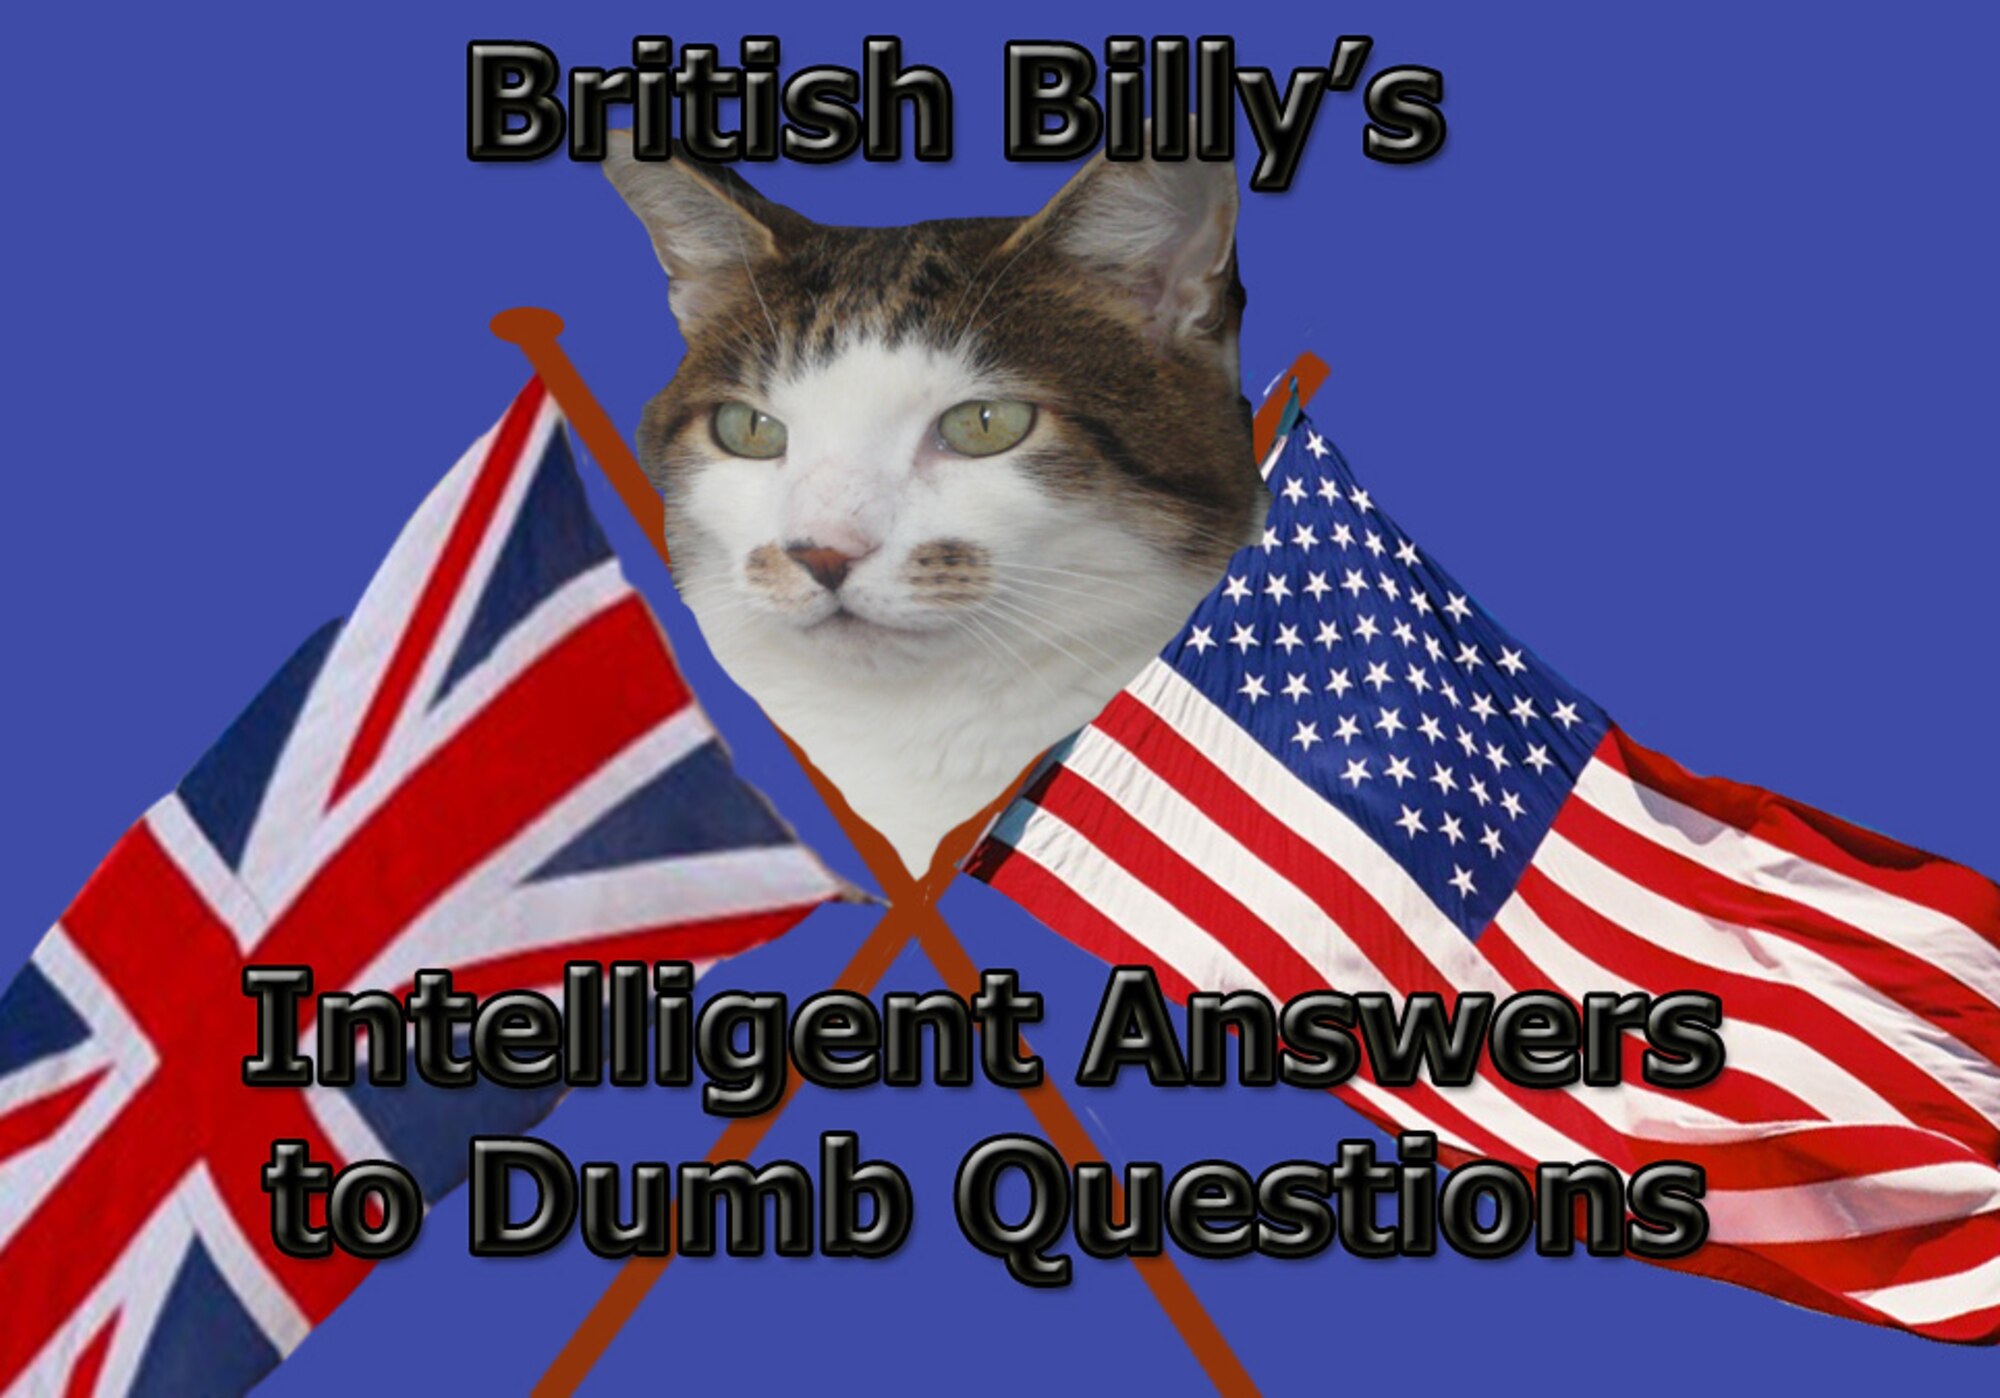 Billy the Cat (aka British Billy) lives in Elveden, a local village about ten miles from RAF Lakenheath. Billy has been around a bit. He came from a rescue centre and prefers not to dwell on the past. He is proud of his country and its heritage and counts his friends and family as hailing from all corners of the British Isles. He is proud to be a “moggy”. Many of his American friends and admirers ask Billy about the things puzzling them about life and culture in the U.K., and if he doesn’t know the answer, he has ways and means of finding out. Feel free to send him any questions, and when he isn’t sleeping or hunting, he’ll try and put a few thoughts together to help you out.